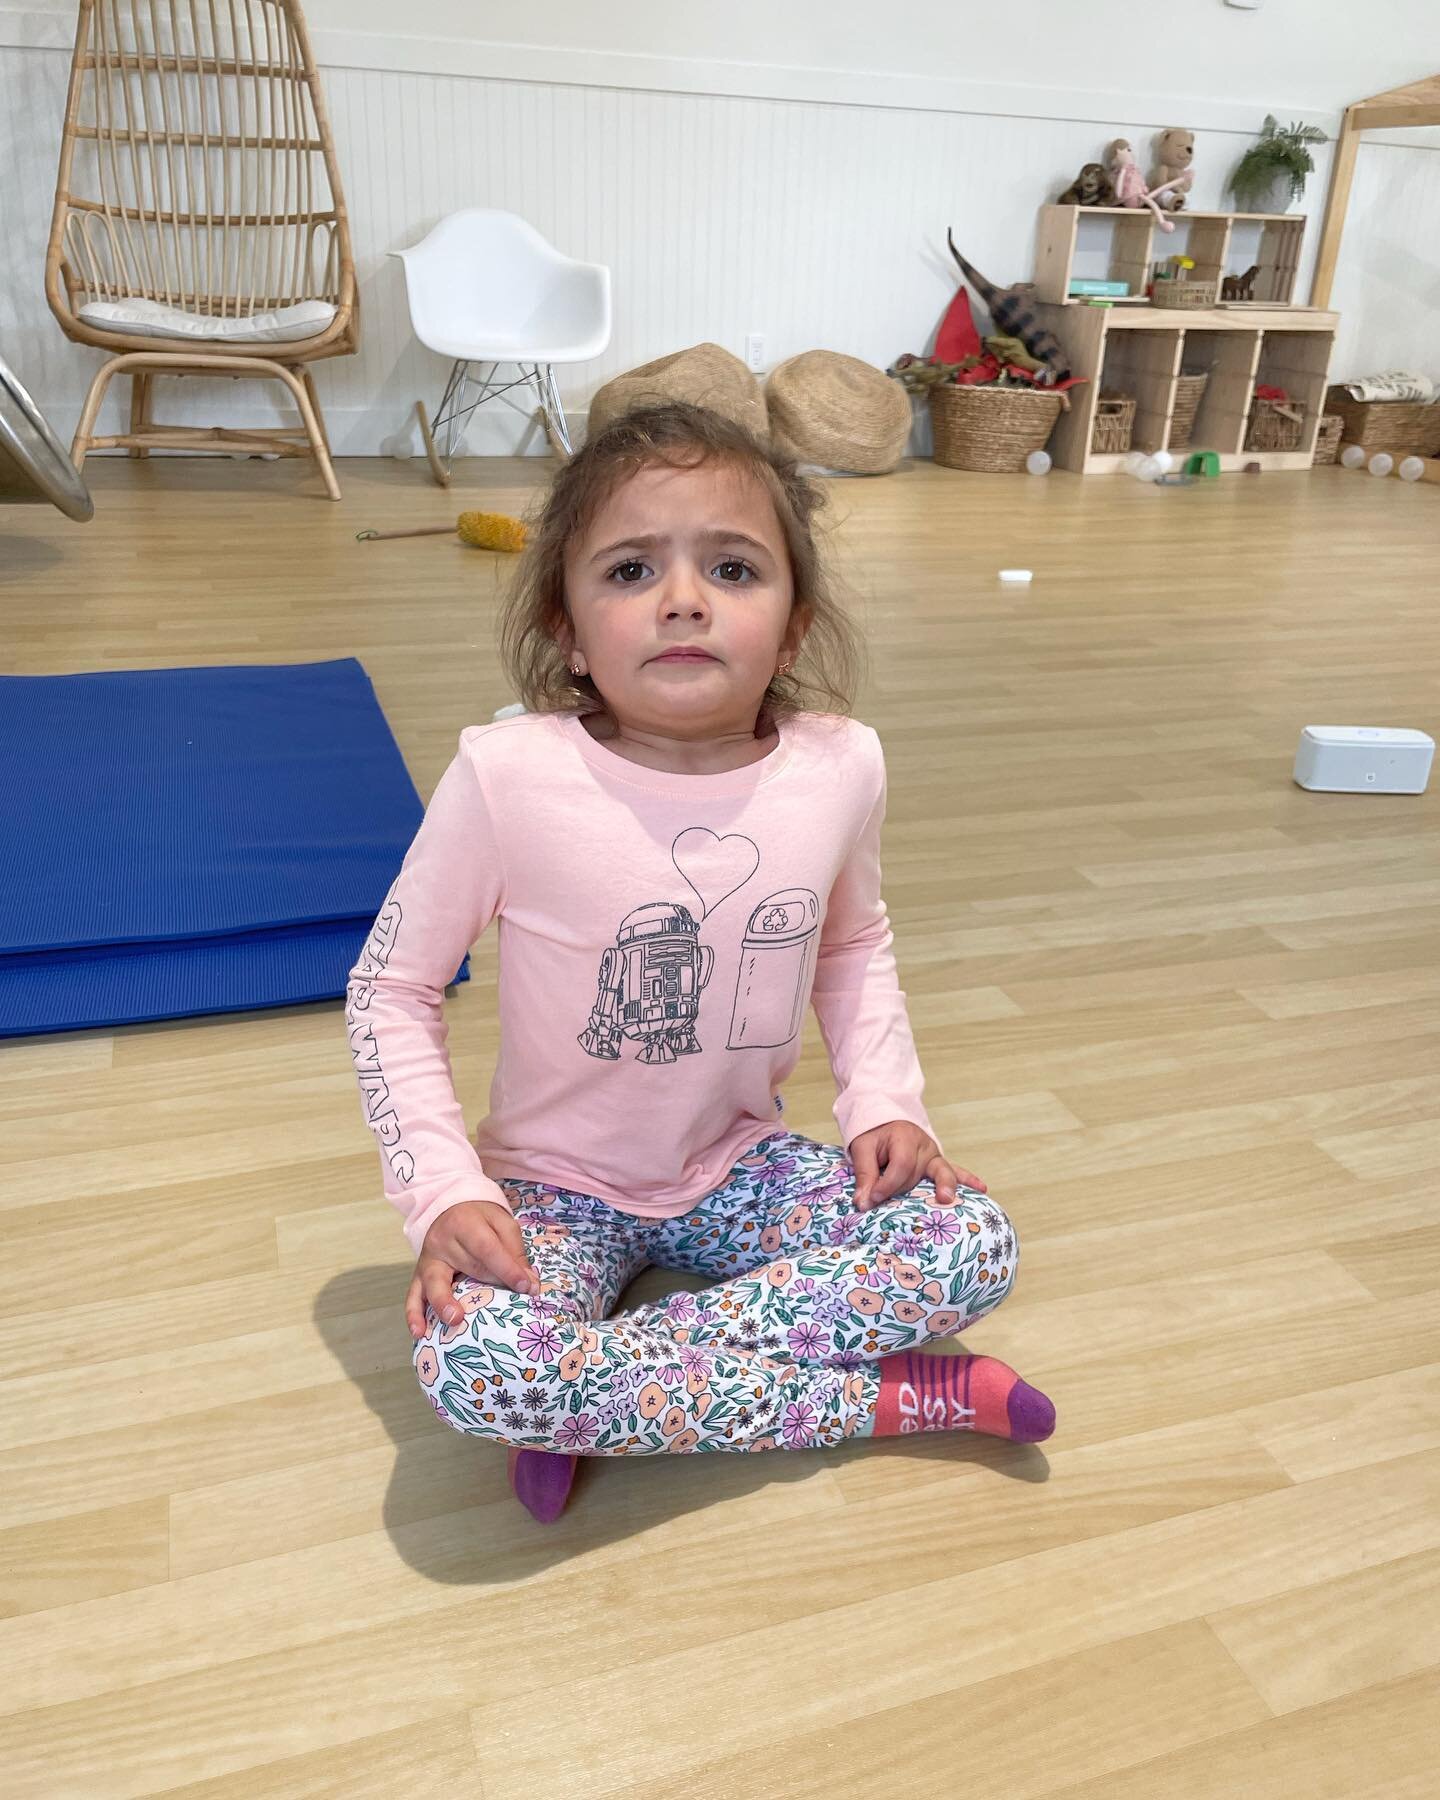 Breathwork Kids! 🌈
@ohmygoodnessinc was magical! ✨

Benefits for littles:
✨Decreases anxiety
✨Improves self-control
✨Helps them feel calm &amp; capable 🧘🏻&zwj;♀️
✨Moves them out of Fight-Flight-Freeze ✨to a Relaxed + Reponsive state
✨Improves memo